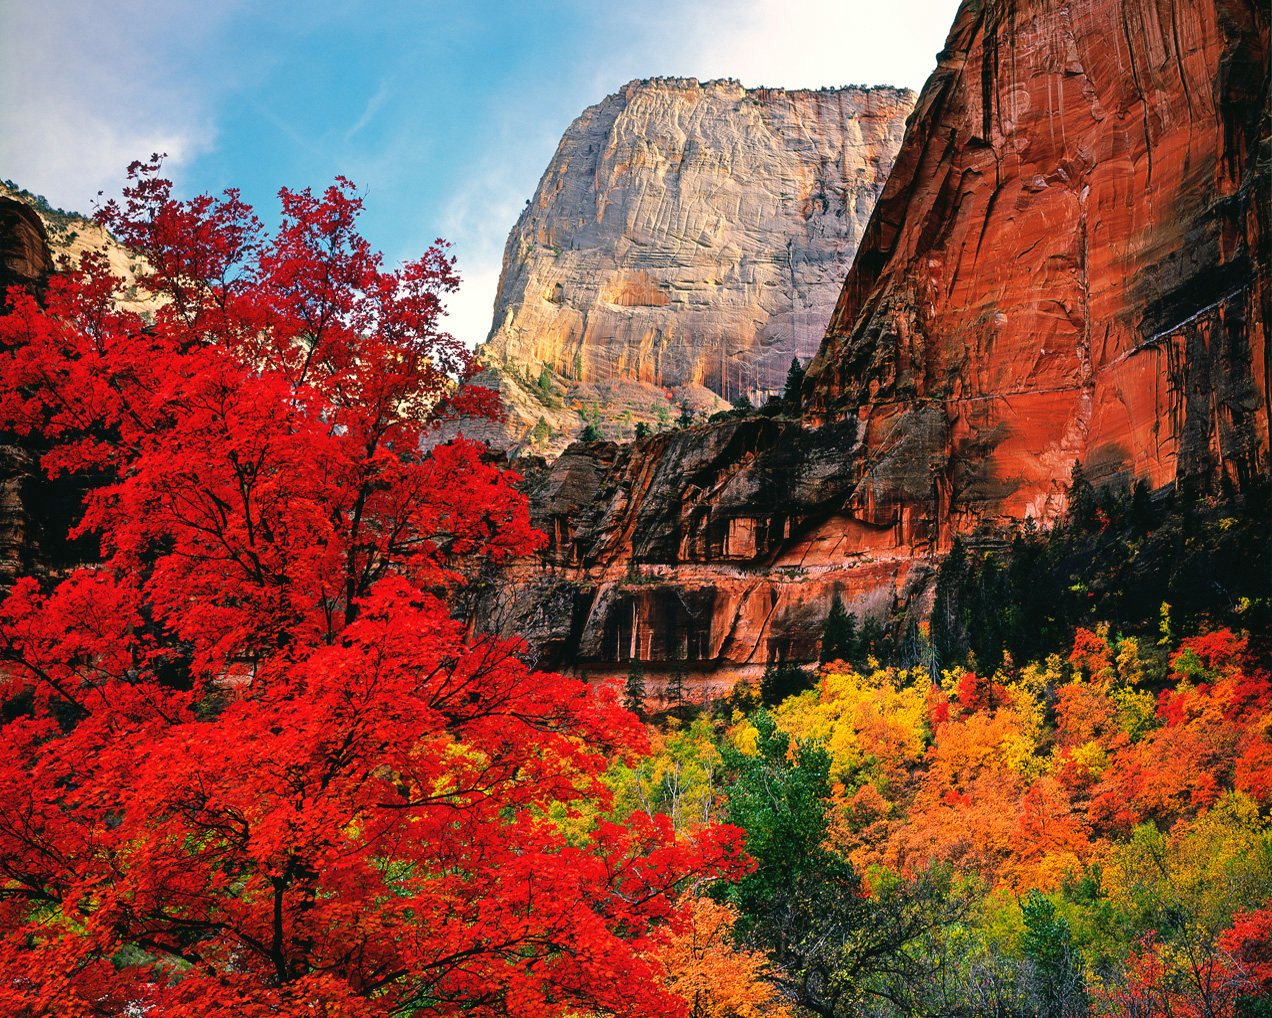 Off-season fall trees photograph in Zion Canyon